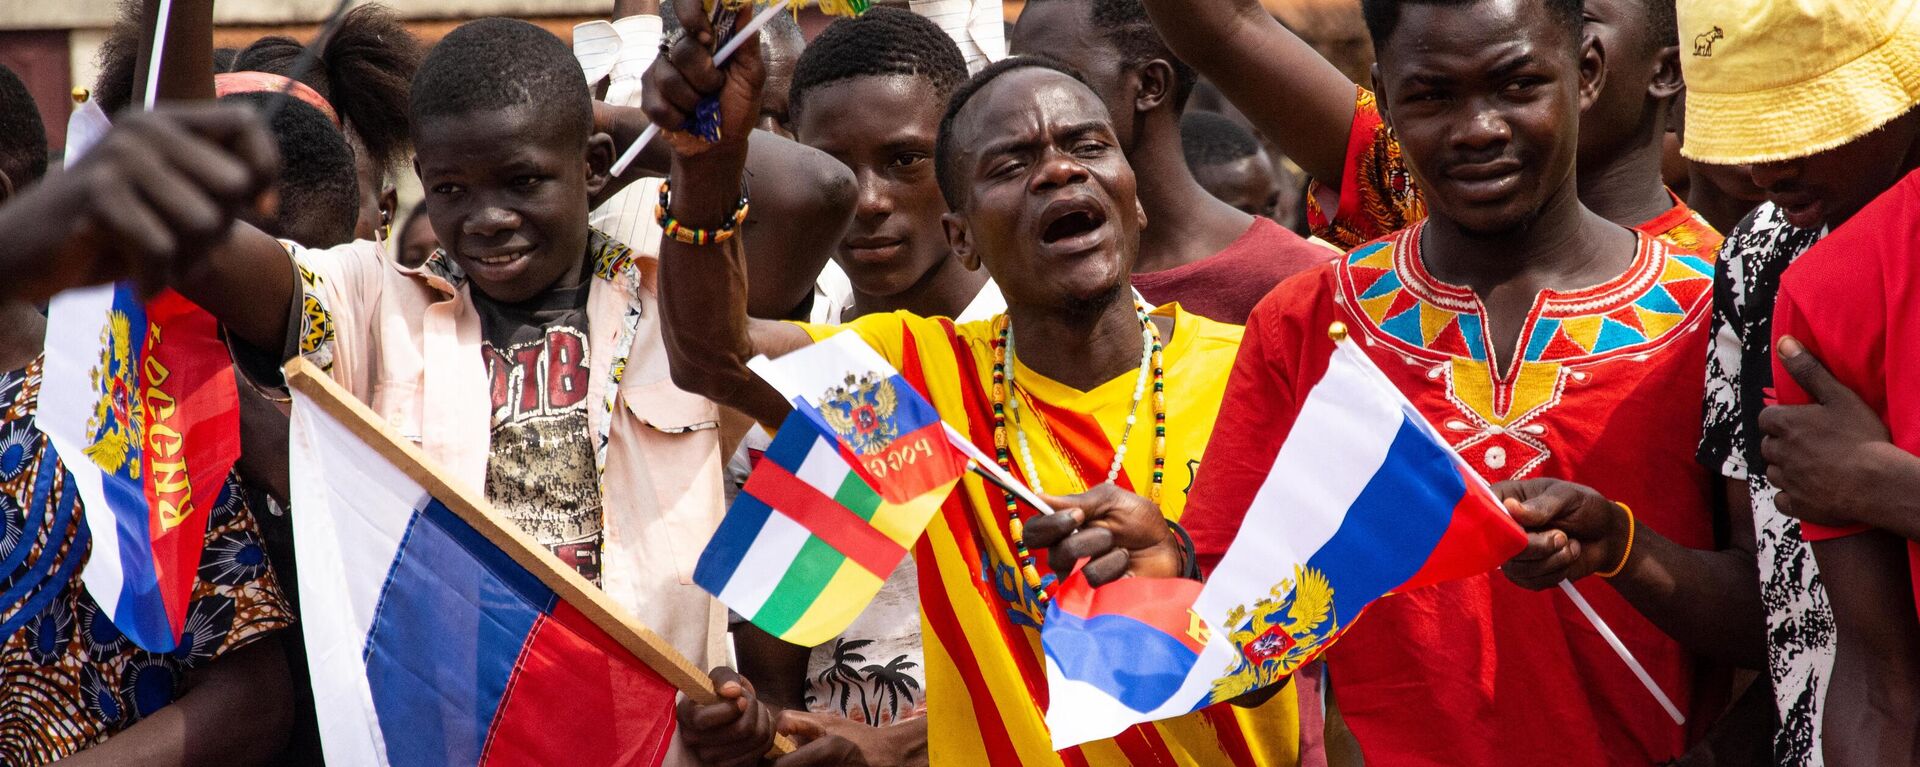 Russian and Central African Republic flags are waived by demonstrators gathered in Bangui on March 5, 2022 during a rally in support of Russia - Sputnik Africa, 1920, 29.05.2023